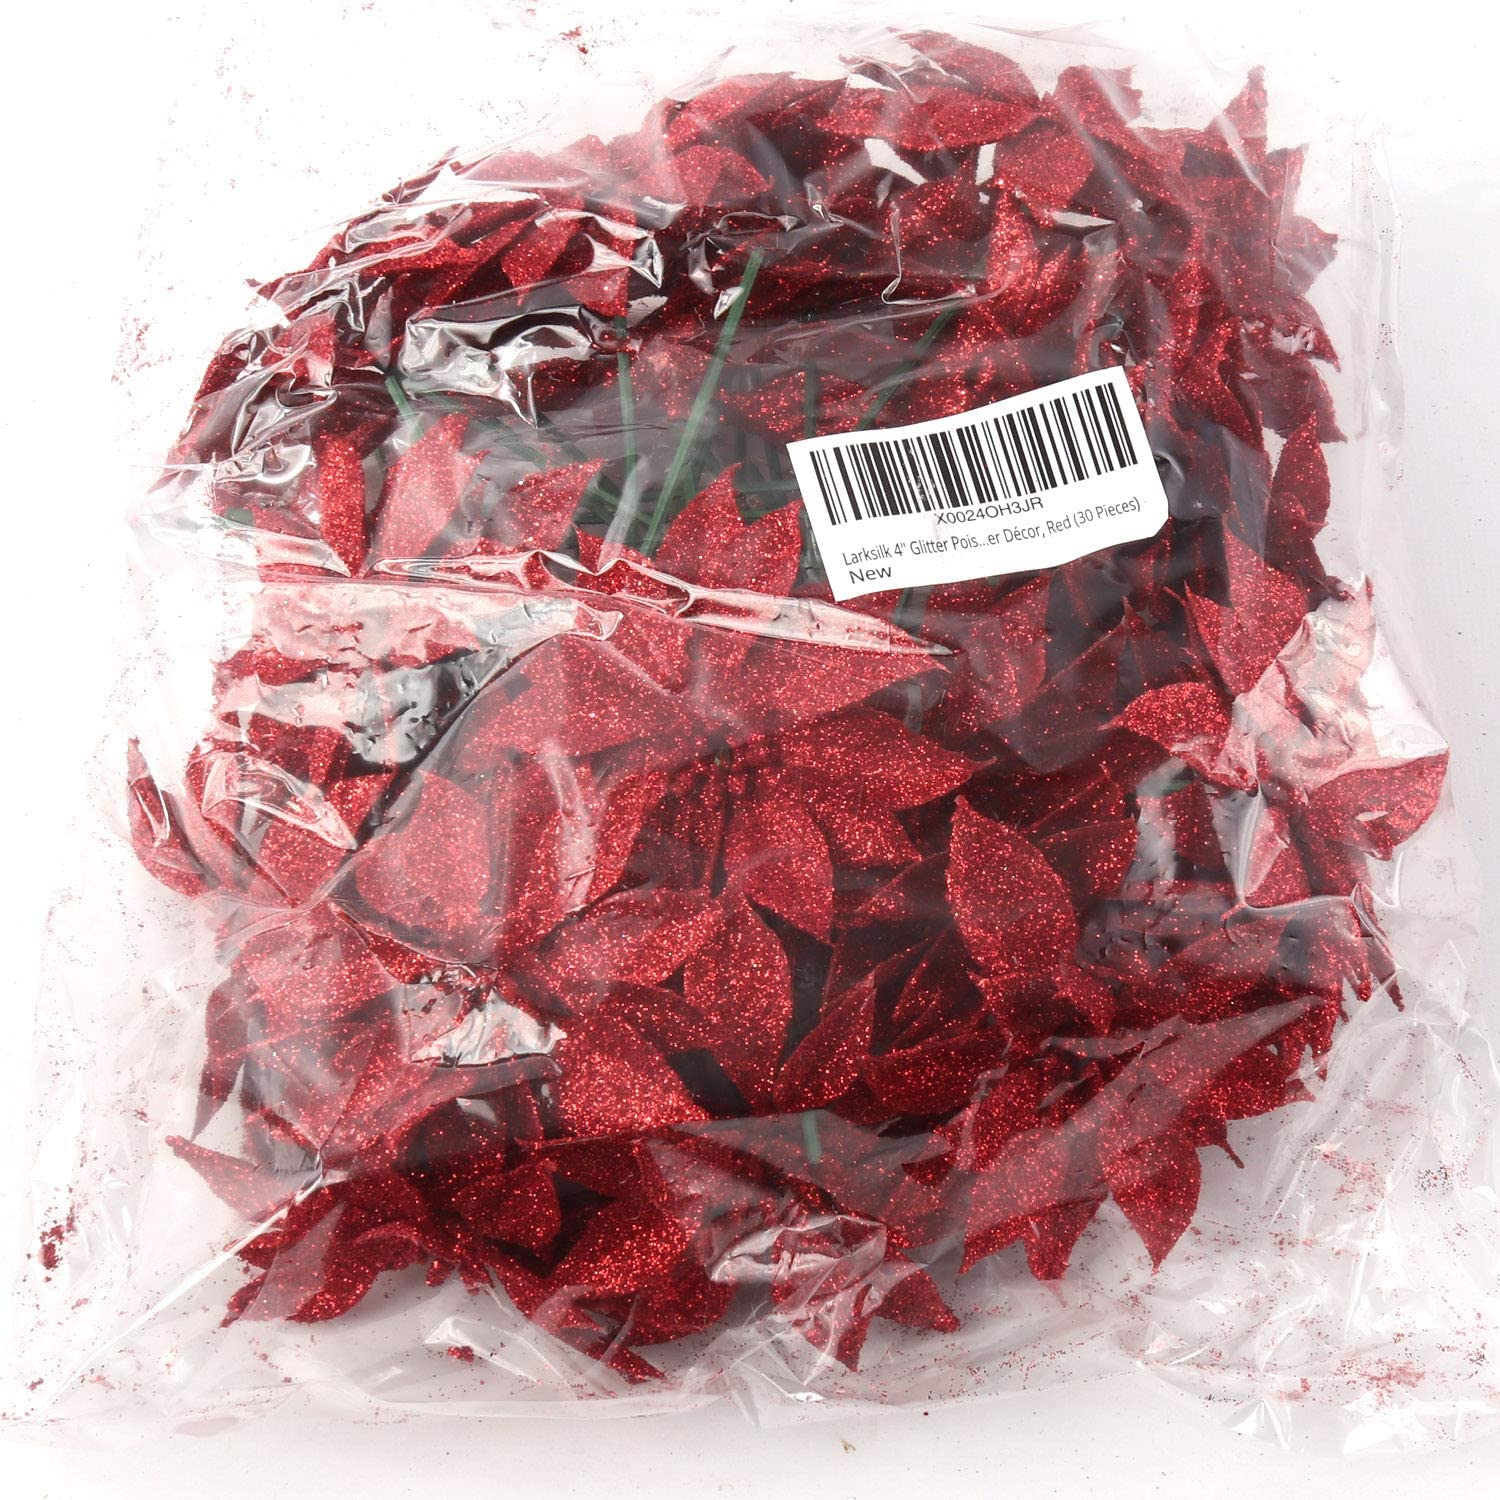 24-Pack Sparkling Red Glitter Poinsettia Picks for Christmas Tree Decoration - Festive Holiday Floral Ornaments